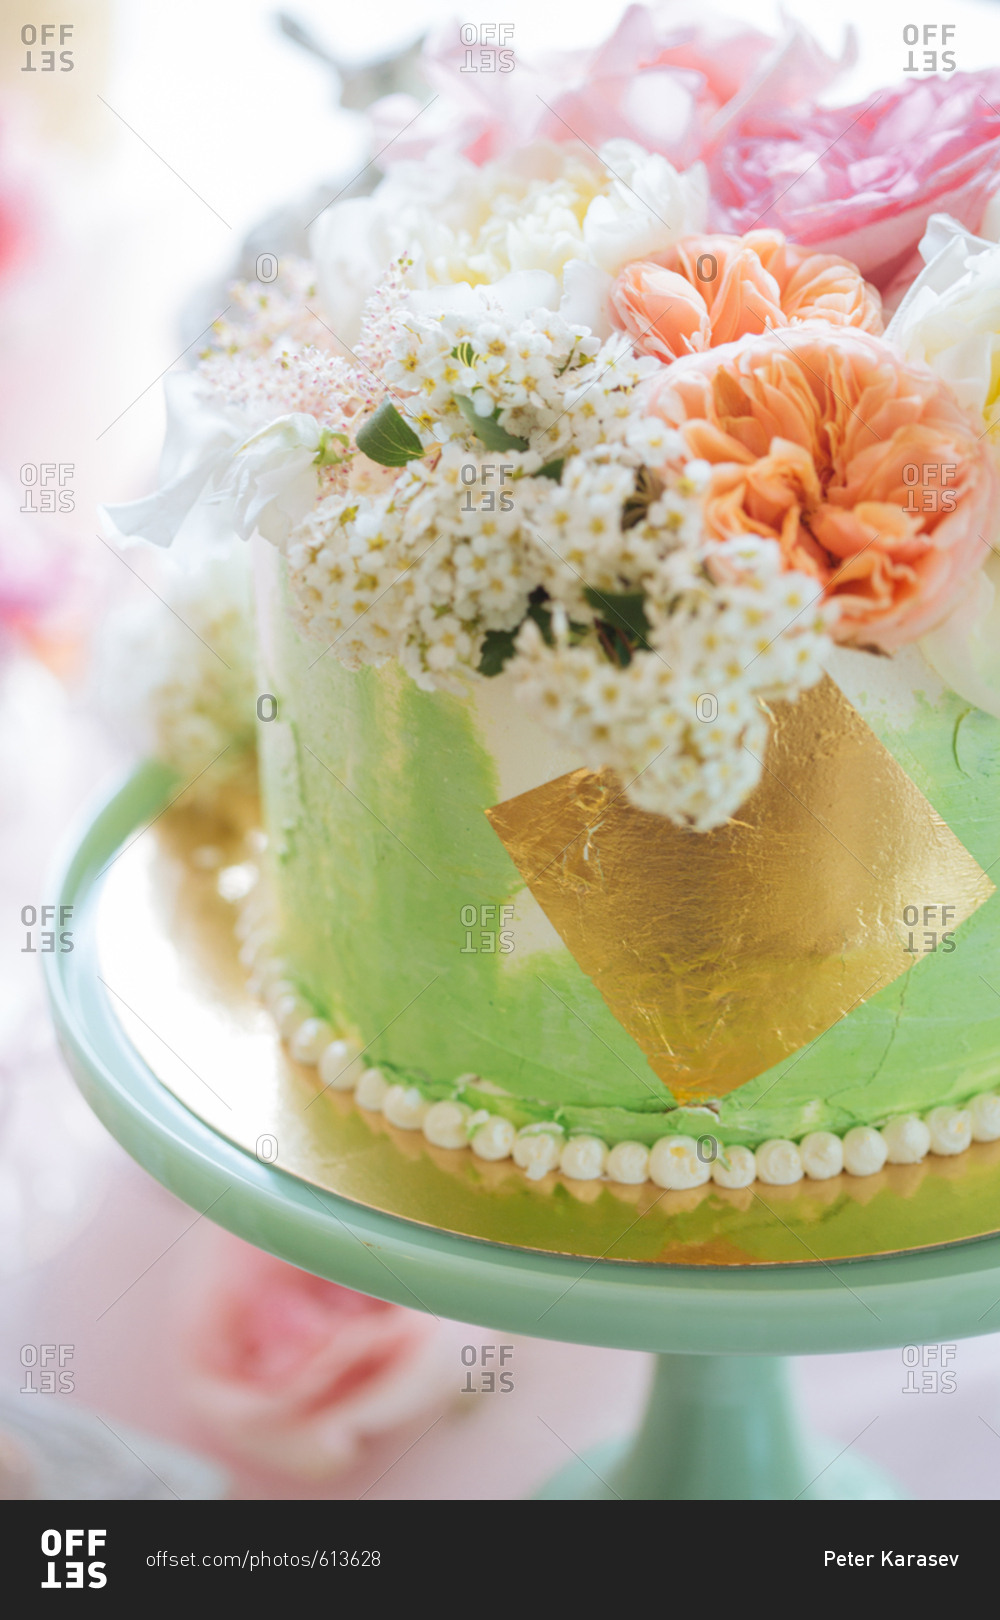 Green and gold cake topped with flowers